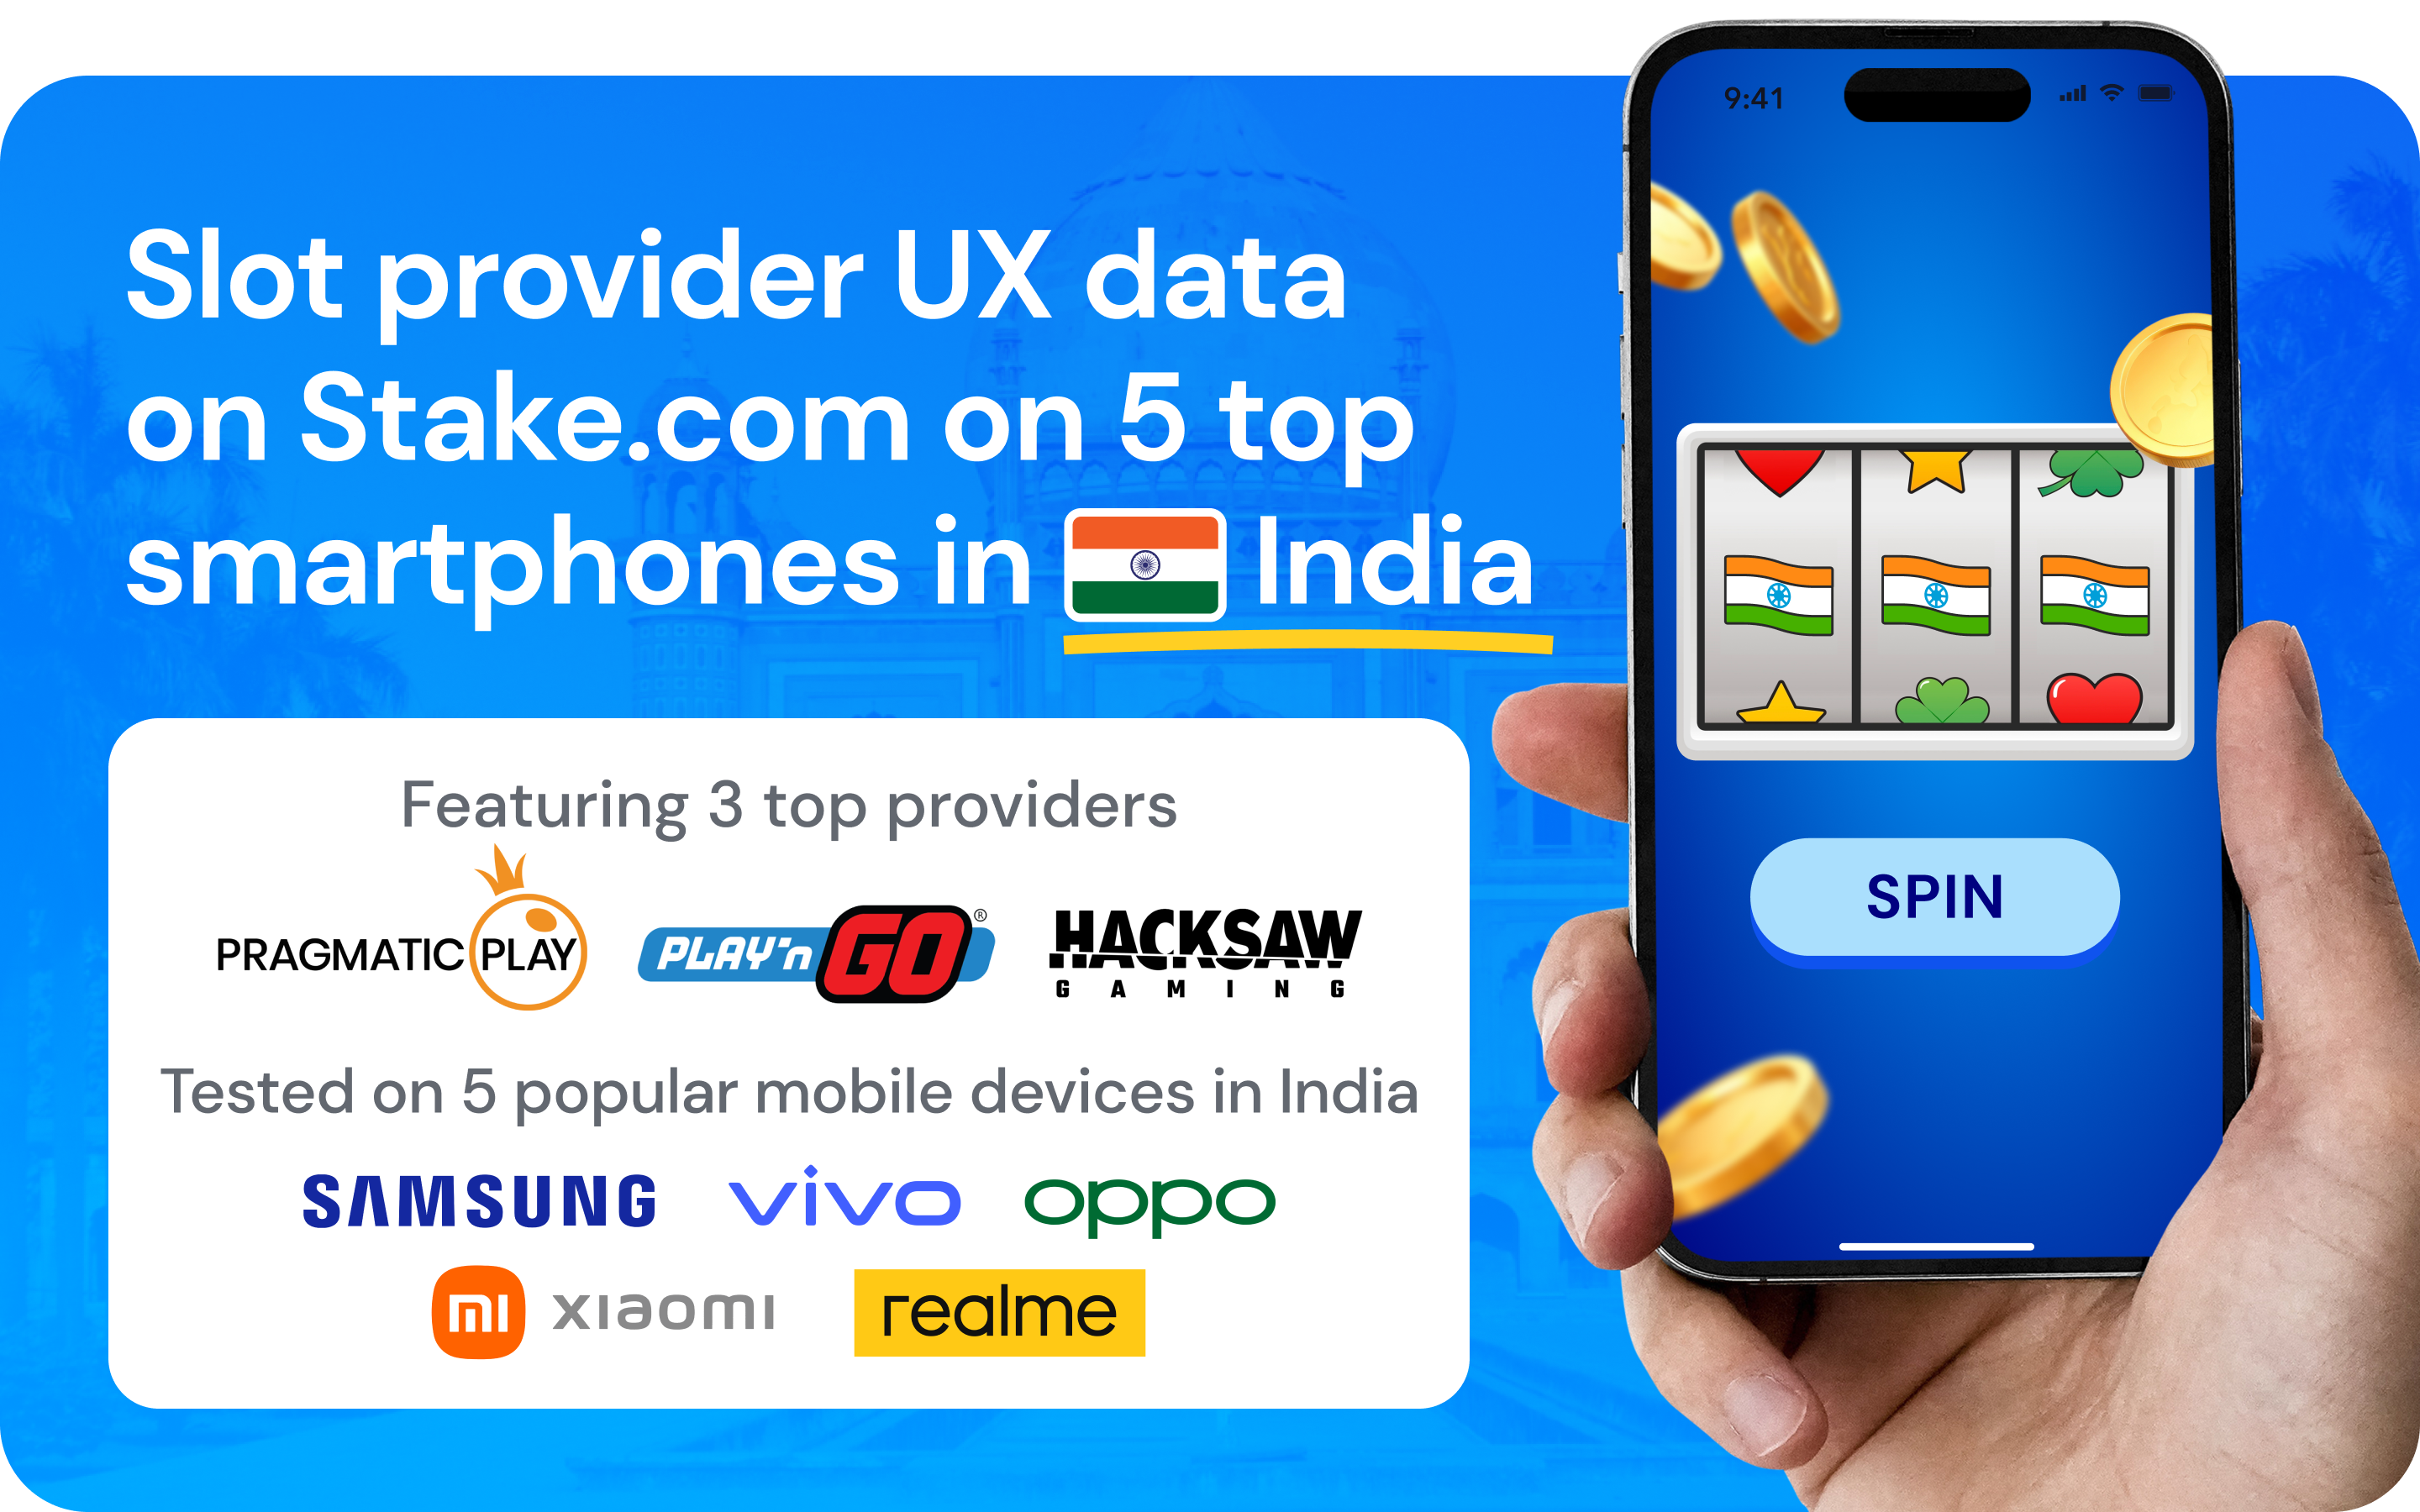 Slot provider UX data on Stake.com across 5 top smartphones in India